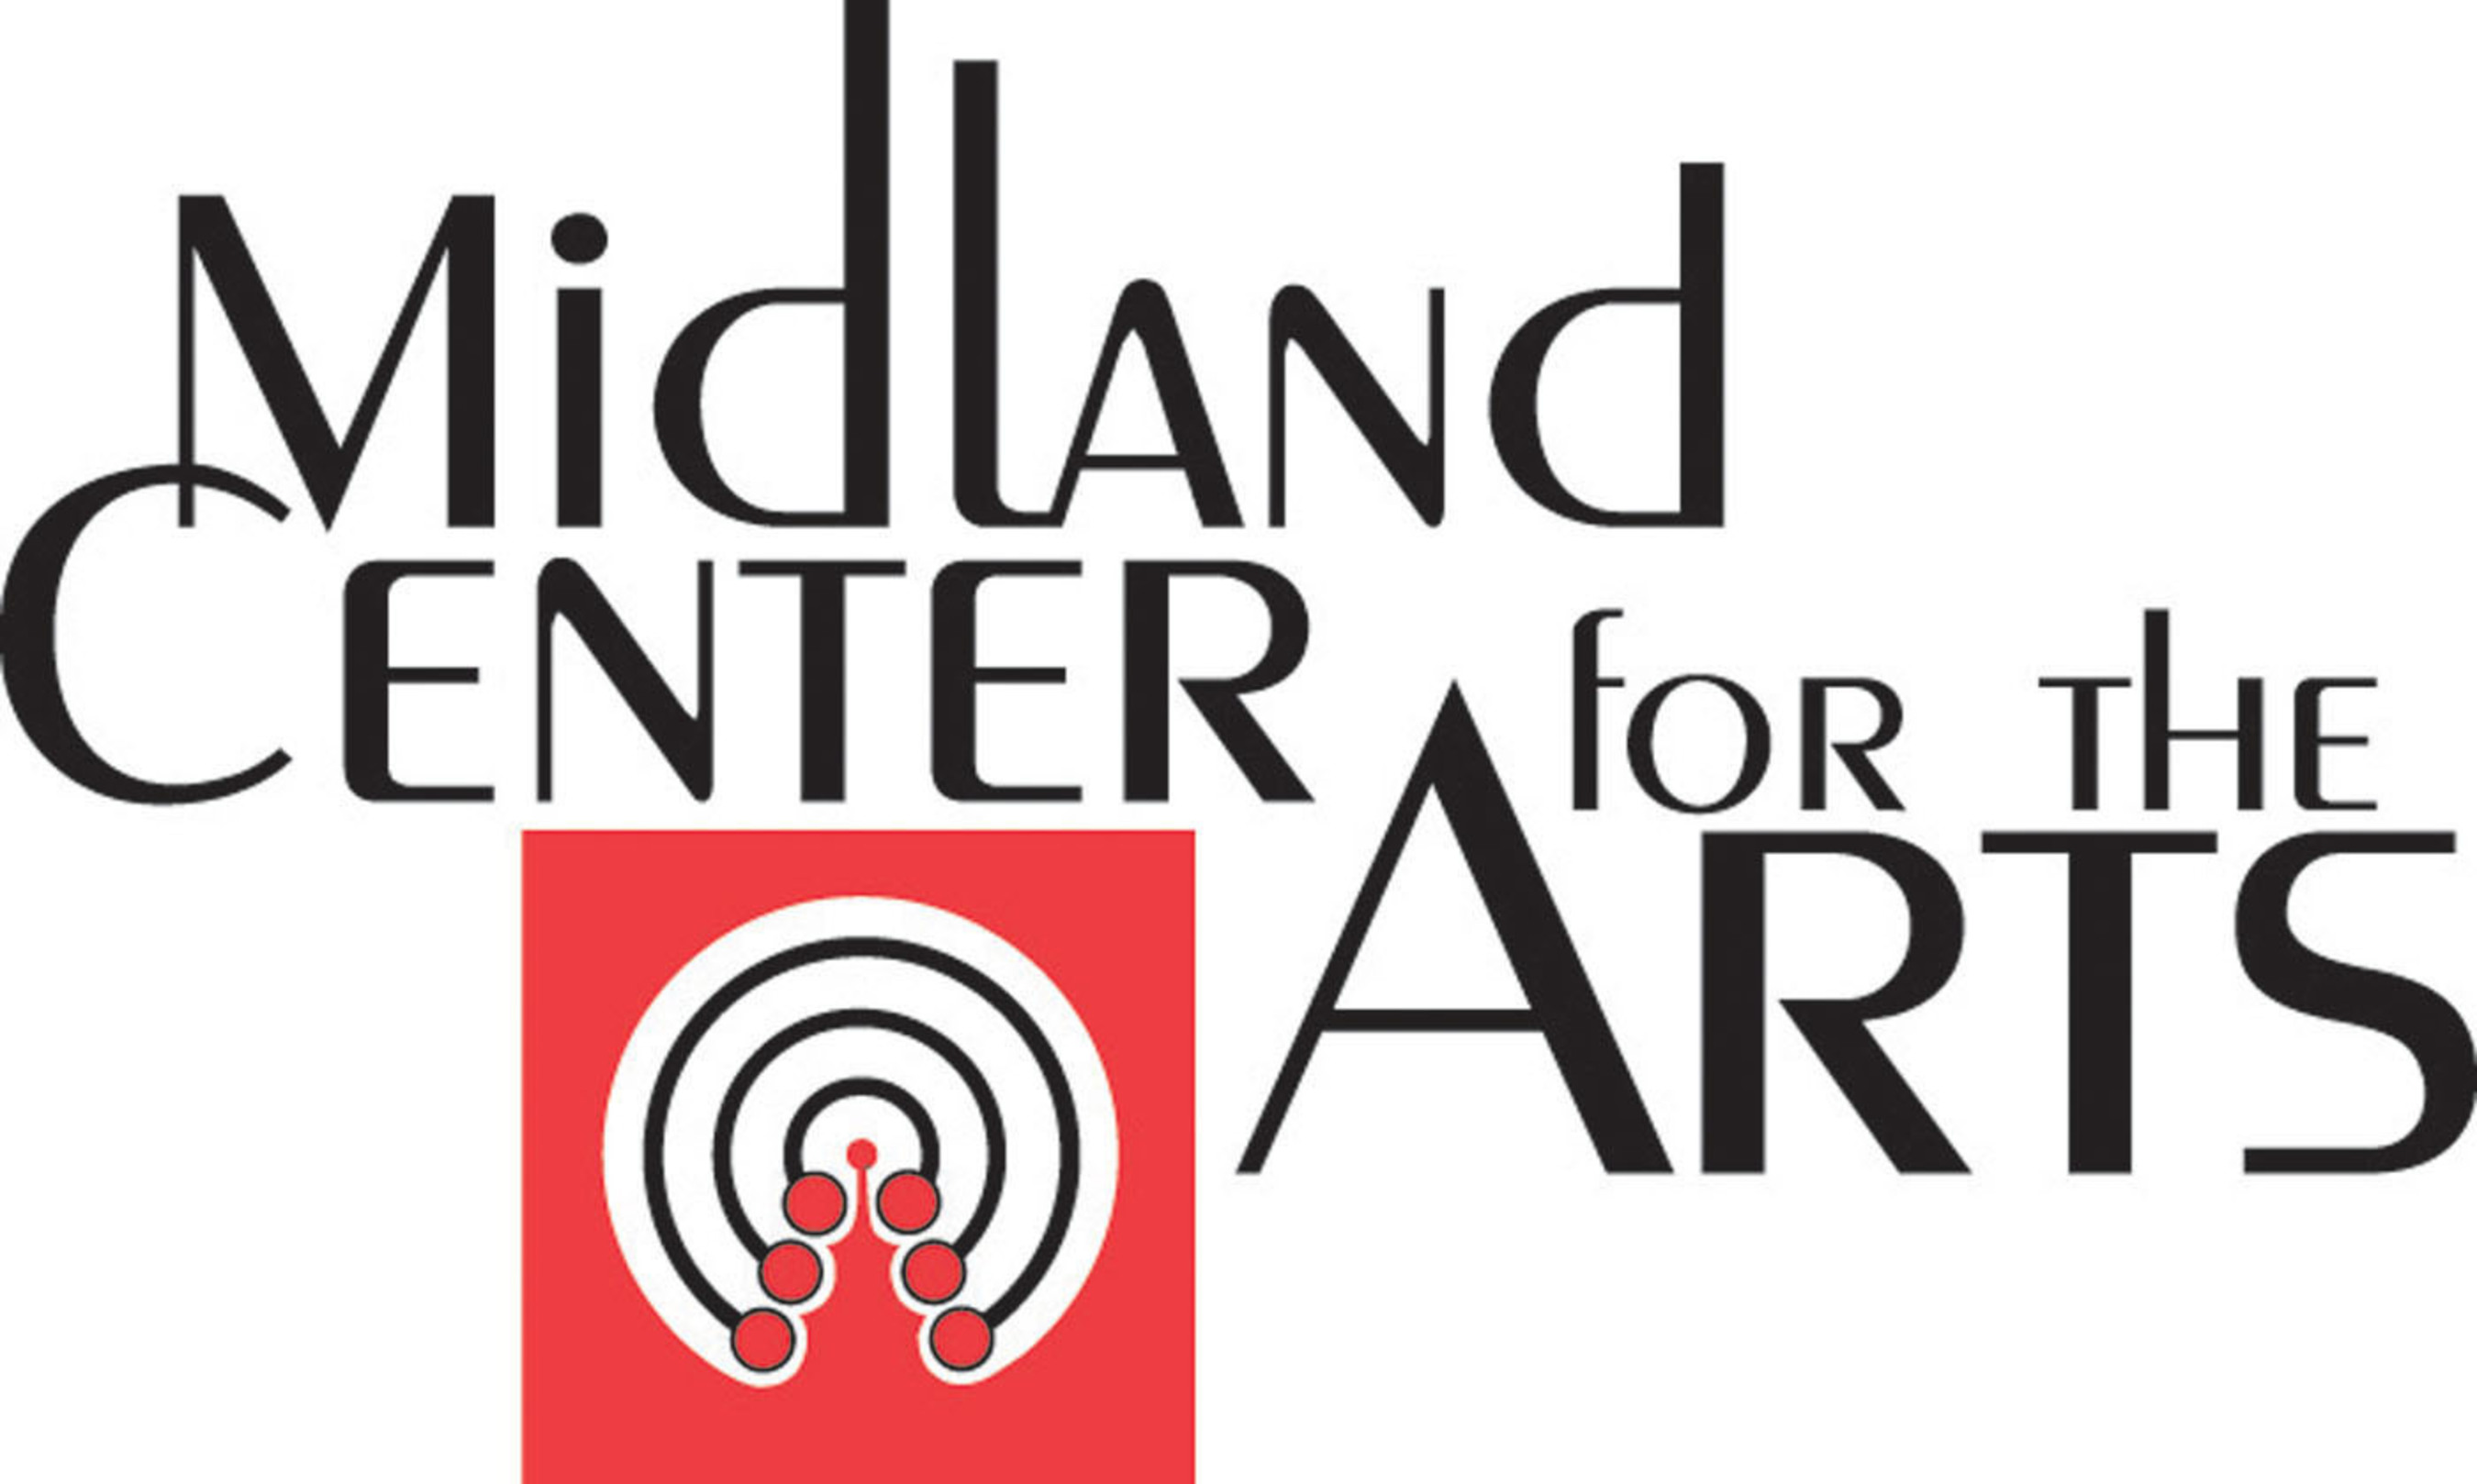 Escape the Ordinary at Midland Center for the Arts